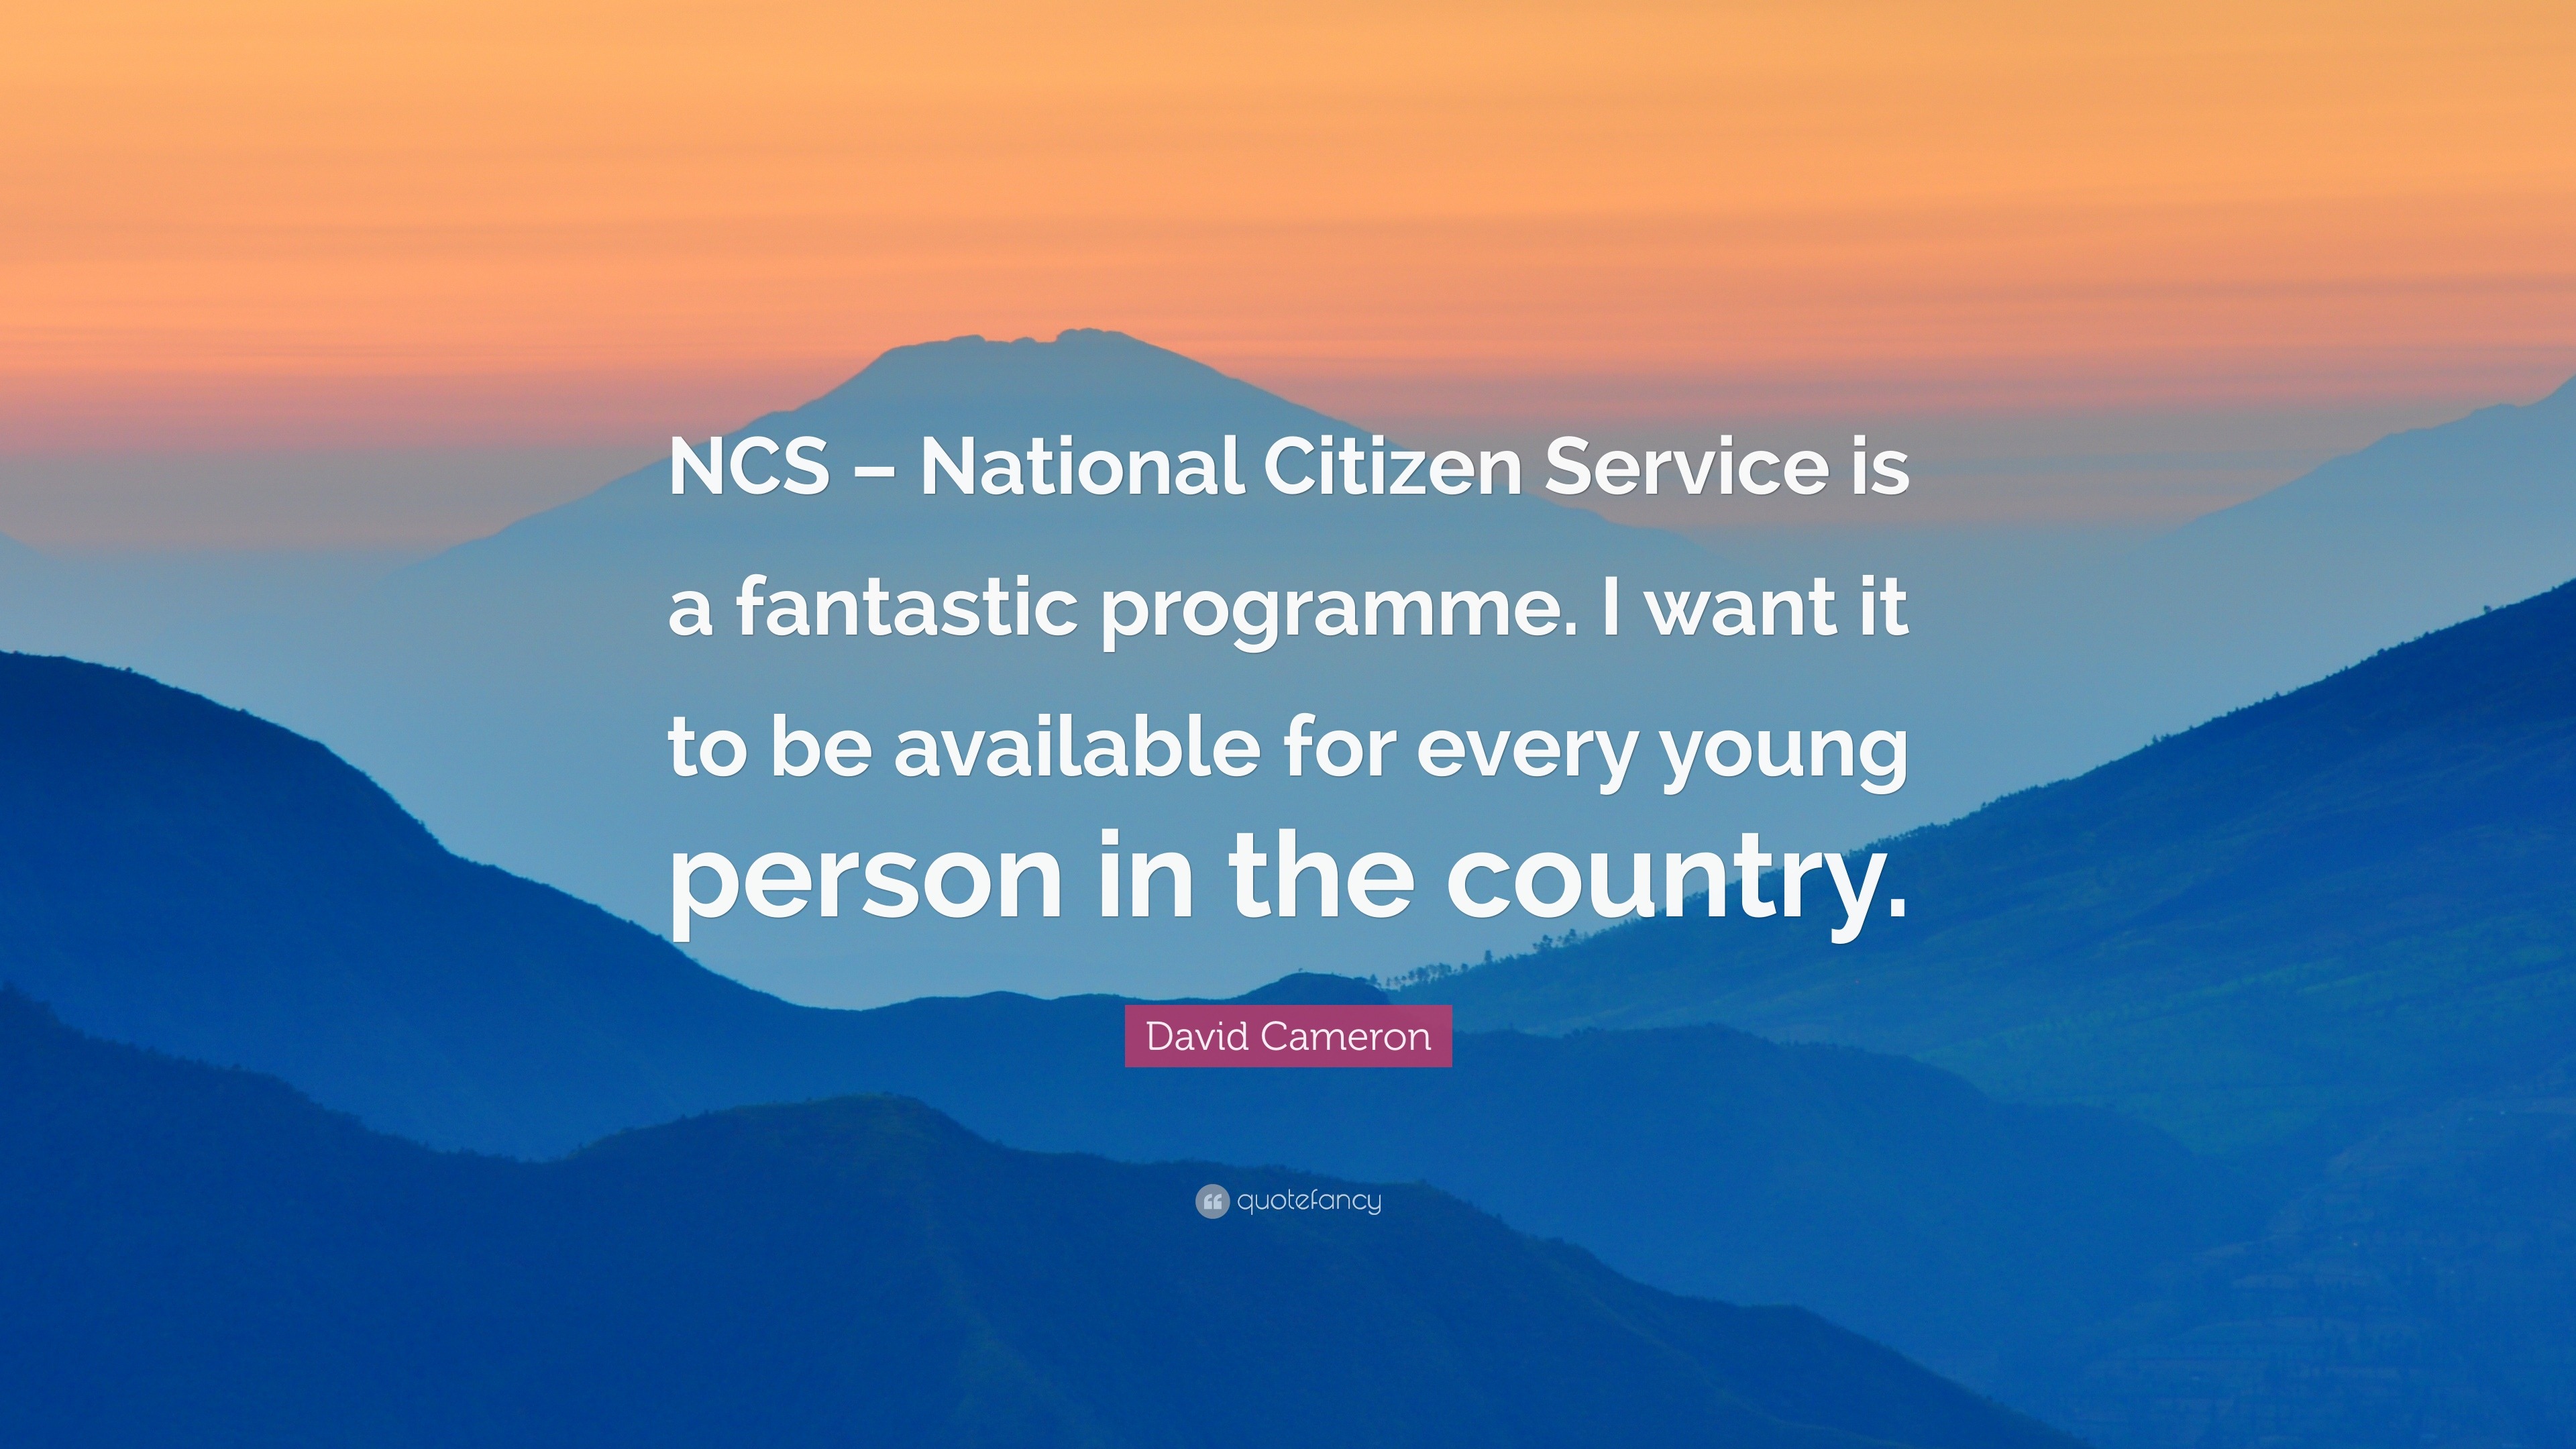 David Cameron Quote Ncs National Citizen Service Is A Fantastic Programme I Want It To Be Available For Every Young Person In The Country 7 Wallpapers Quotefancy